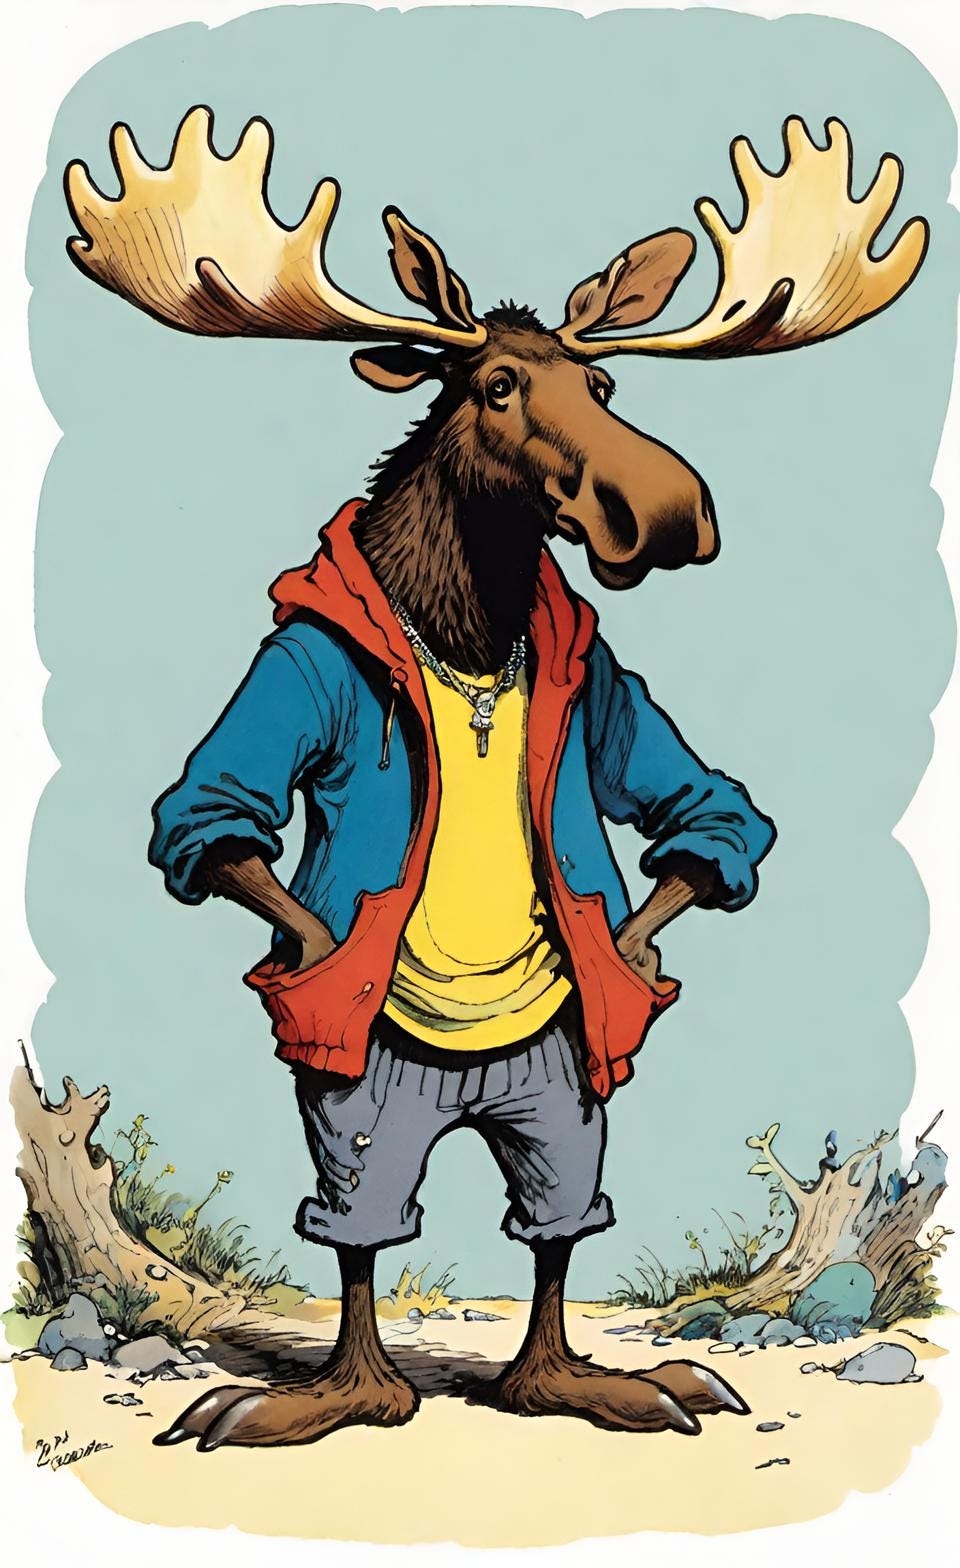 A moose wearing shorts and a blue top.